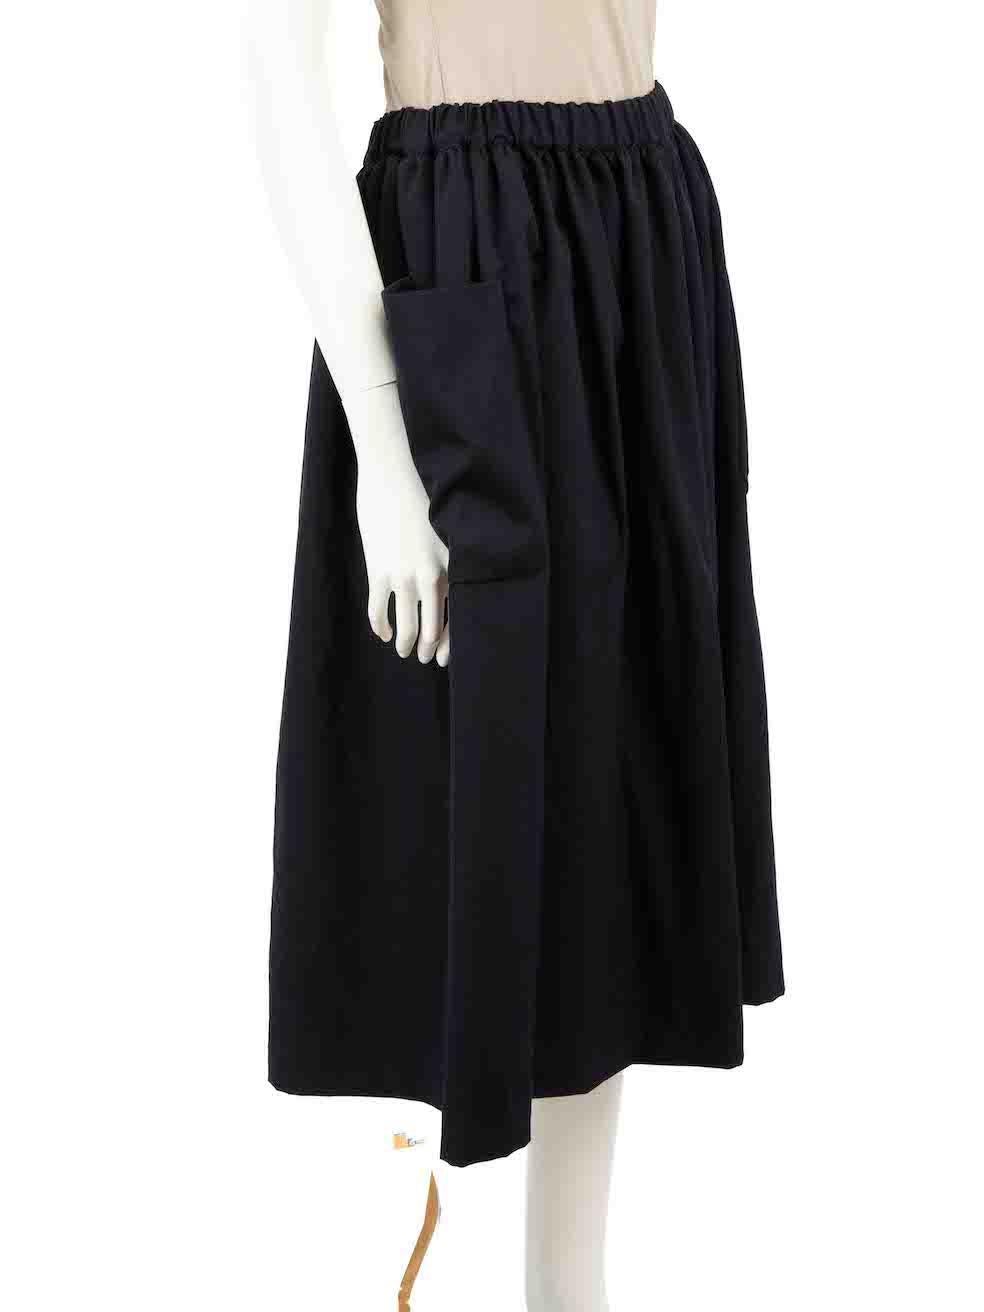 CONDITION is Very good. Hardly any visible wear to skirt is evident on this used Comme Des Garcons Girl designer resale item.
 
 Details
 Navy
 Wool
 Full skirt
 Midi length
 Elasticated waistband
 2x Front side pockets
 
 
 Made in Japan
 
